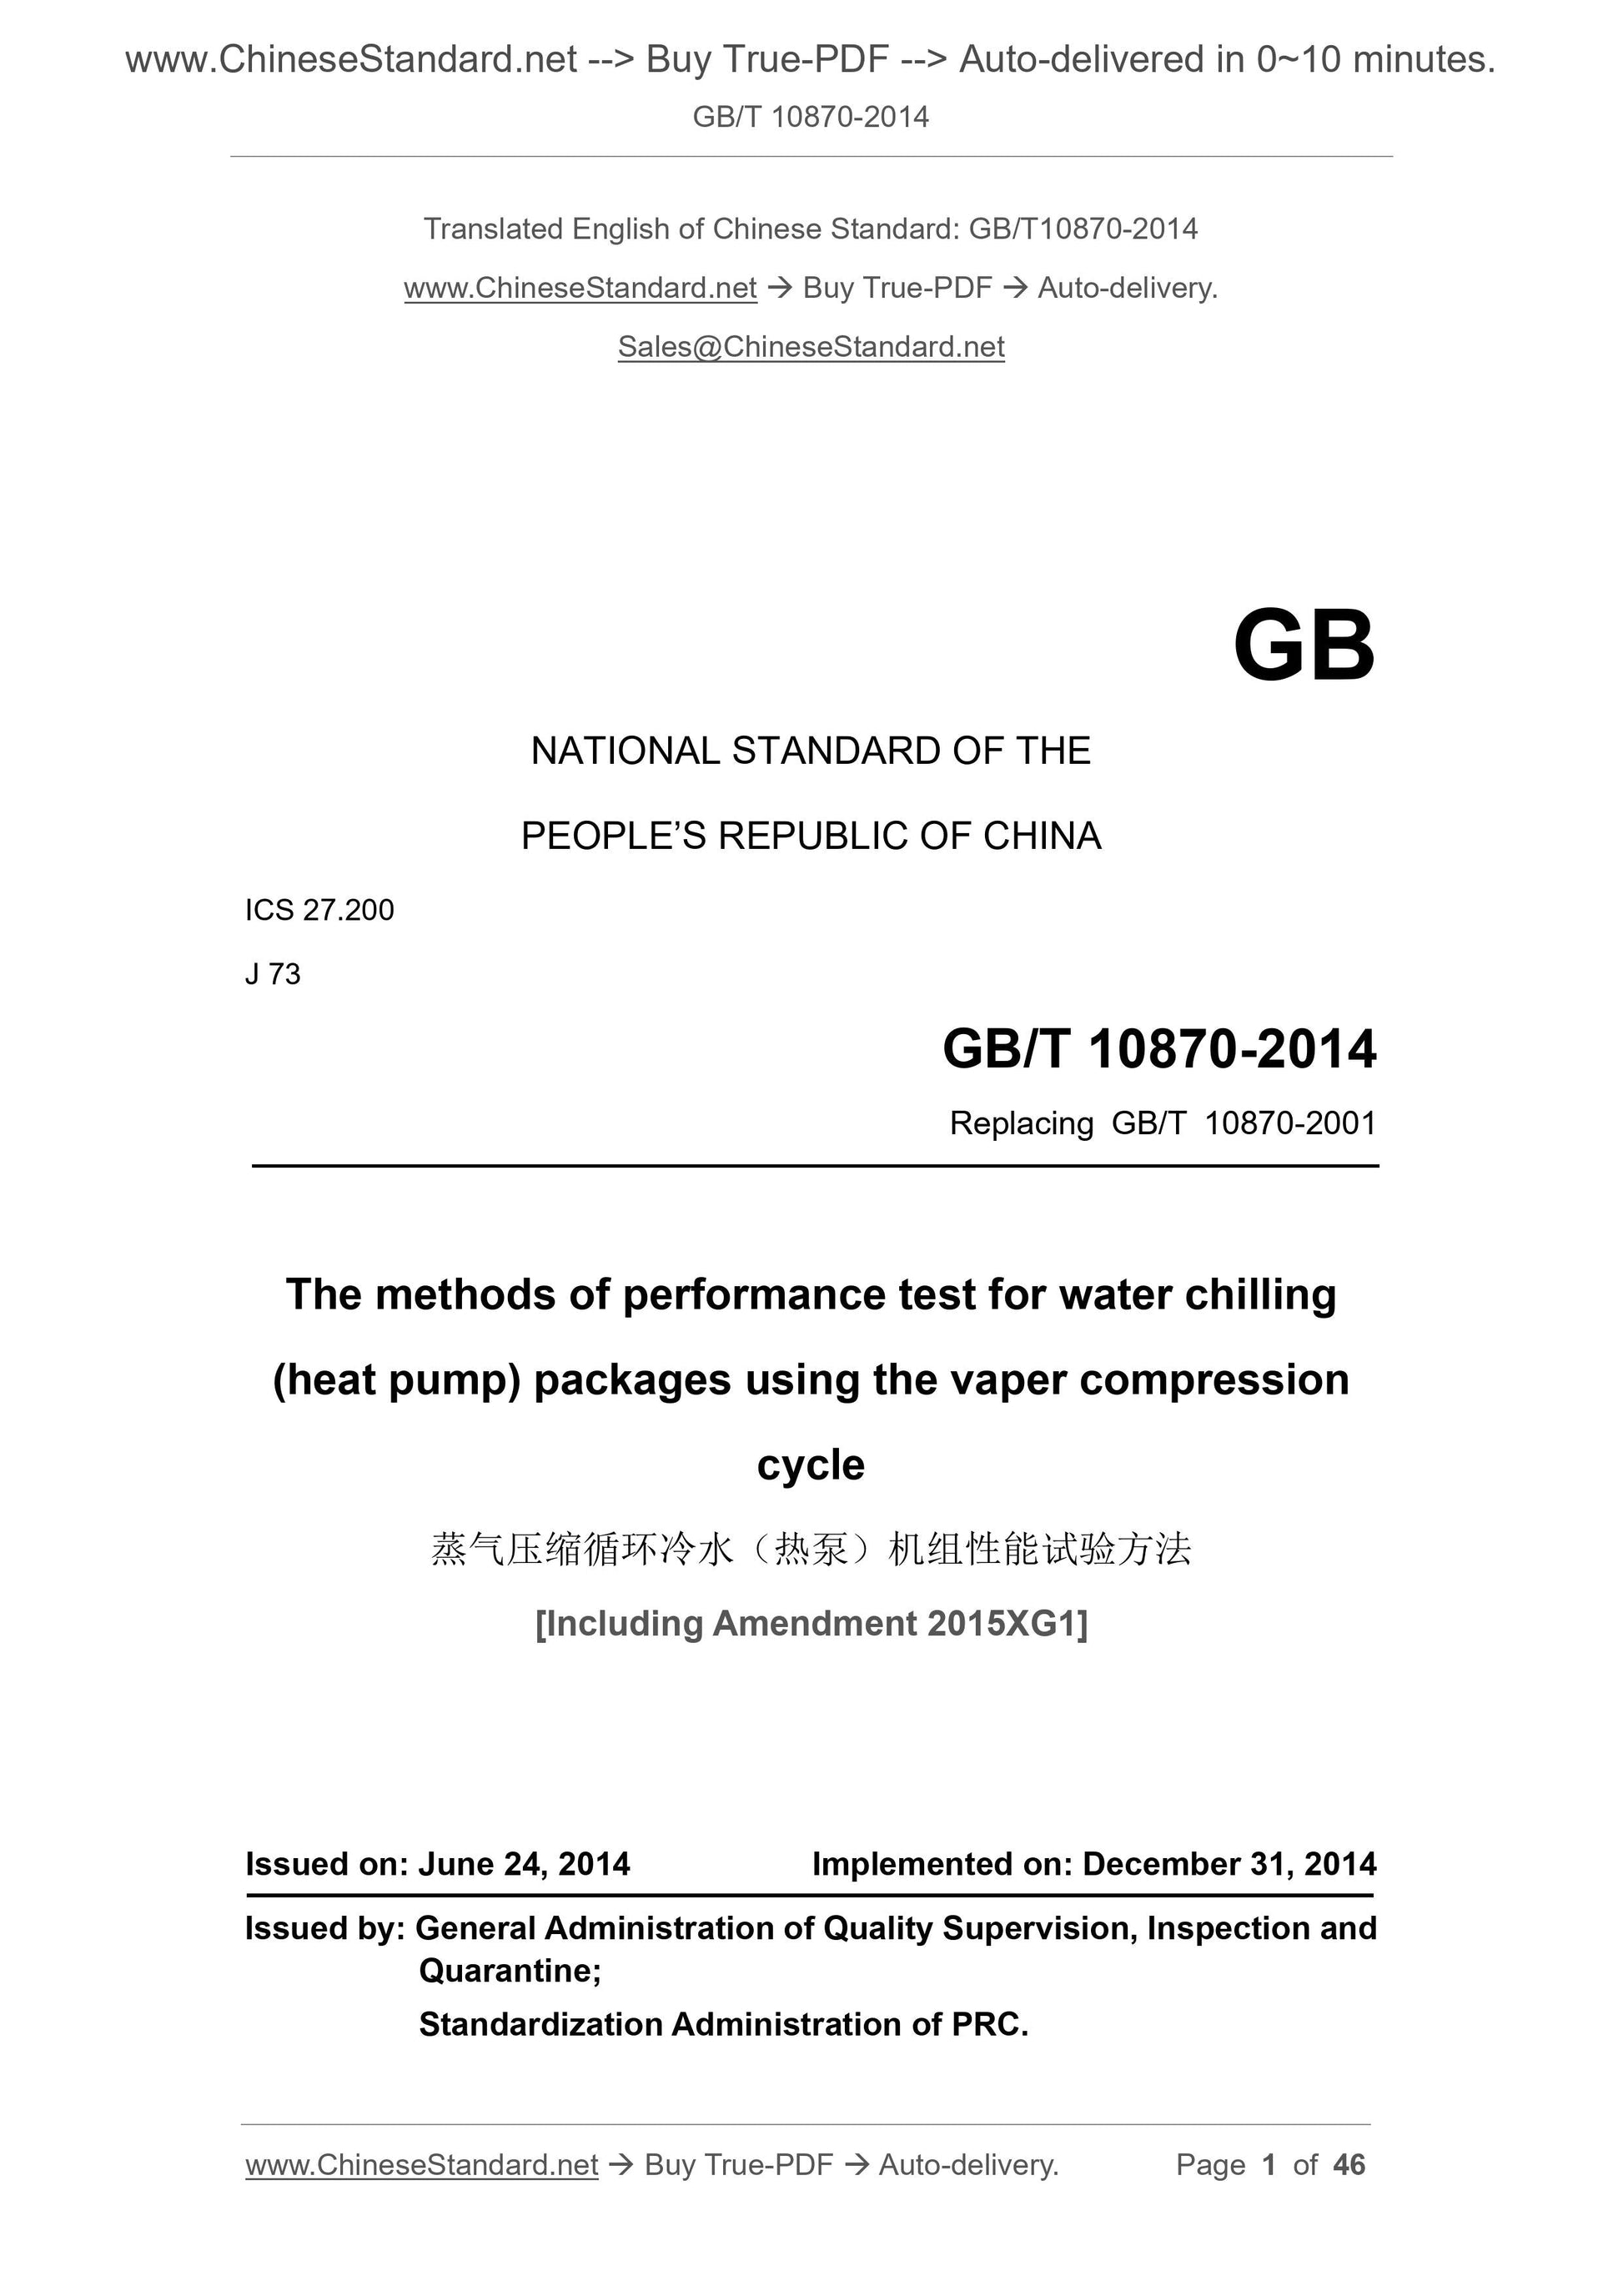 GB/T 10870-2014 Page 1